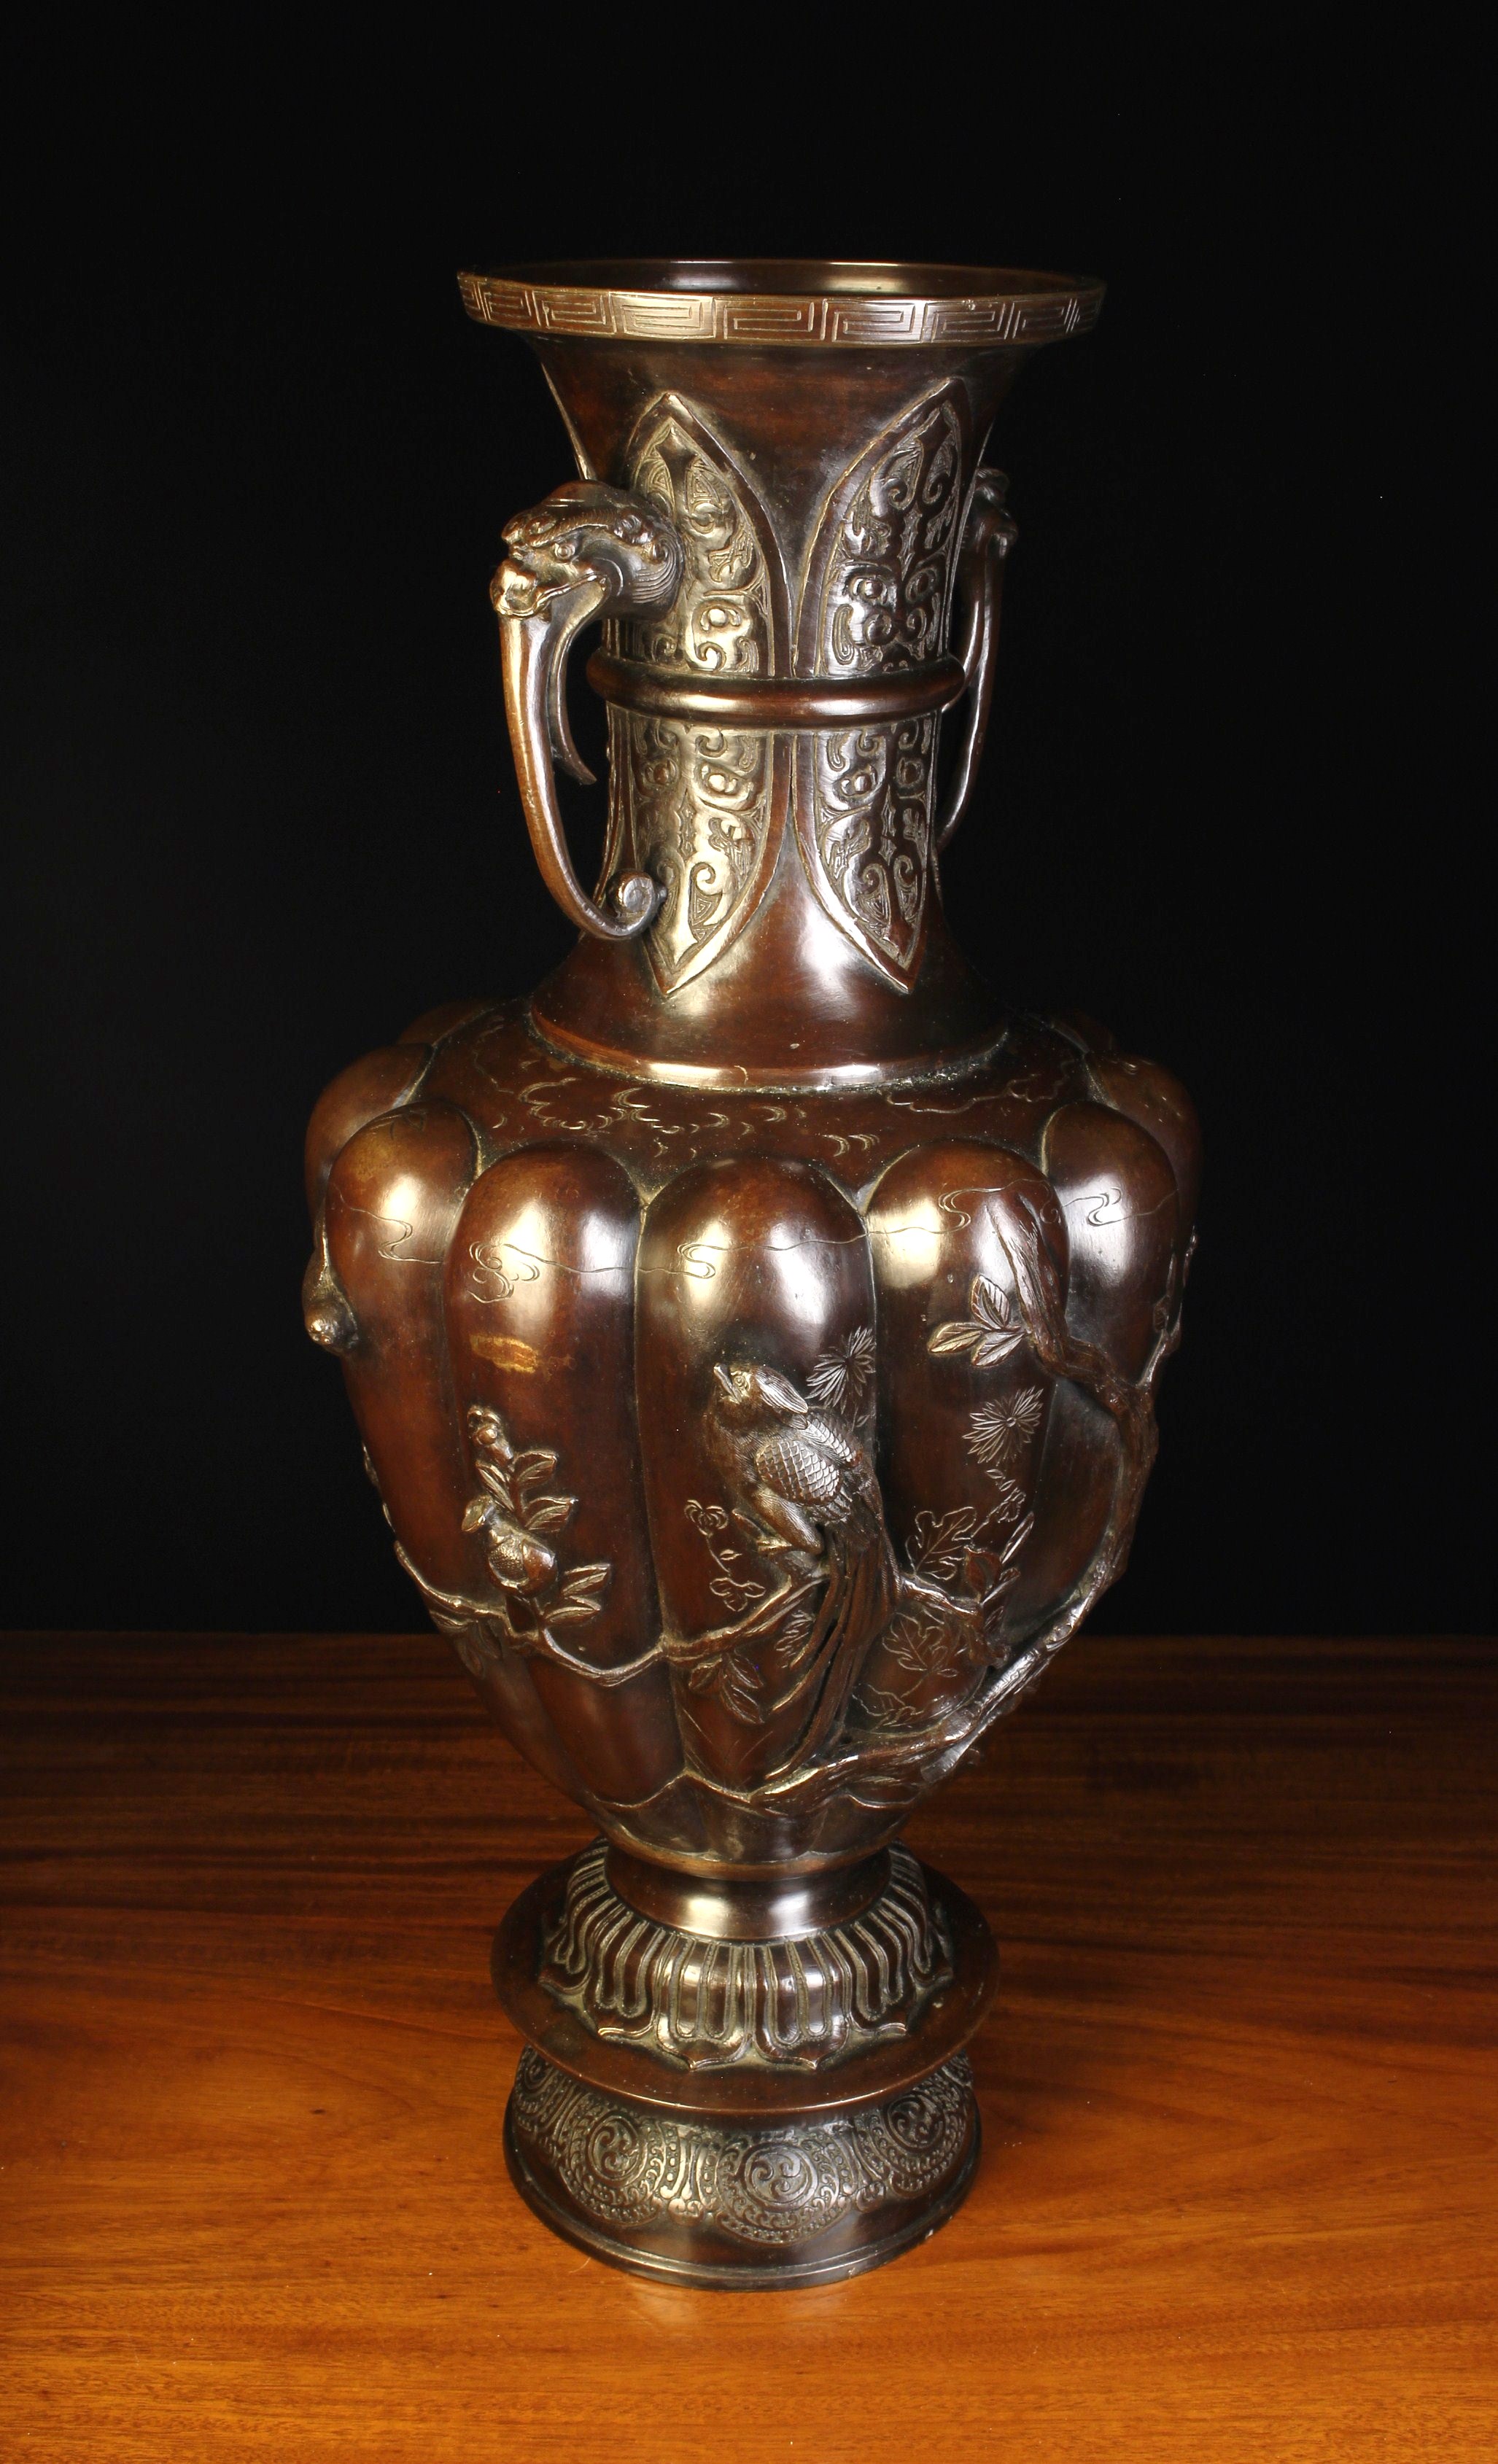 A Large 19th Century Japanese Brown Patinated Copper Alloy Vase. - Image 2 of 2